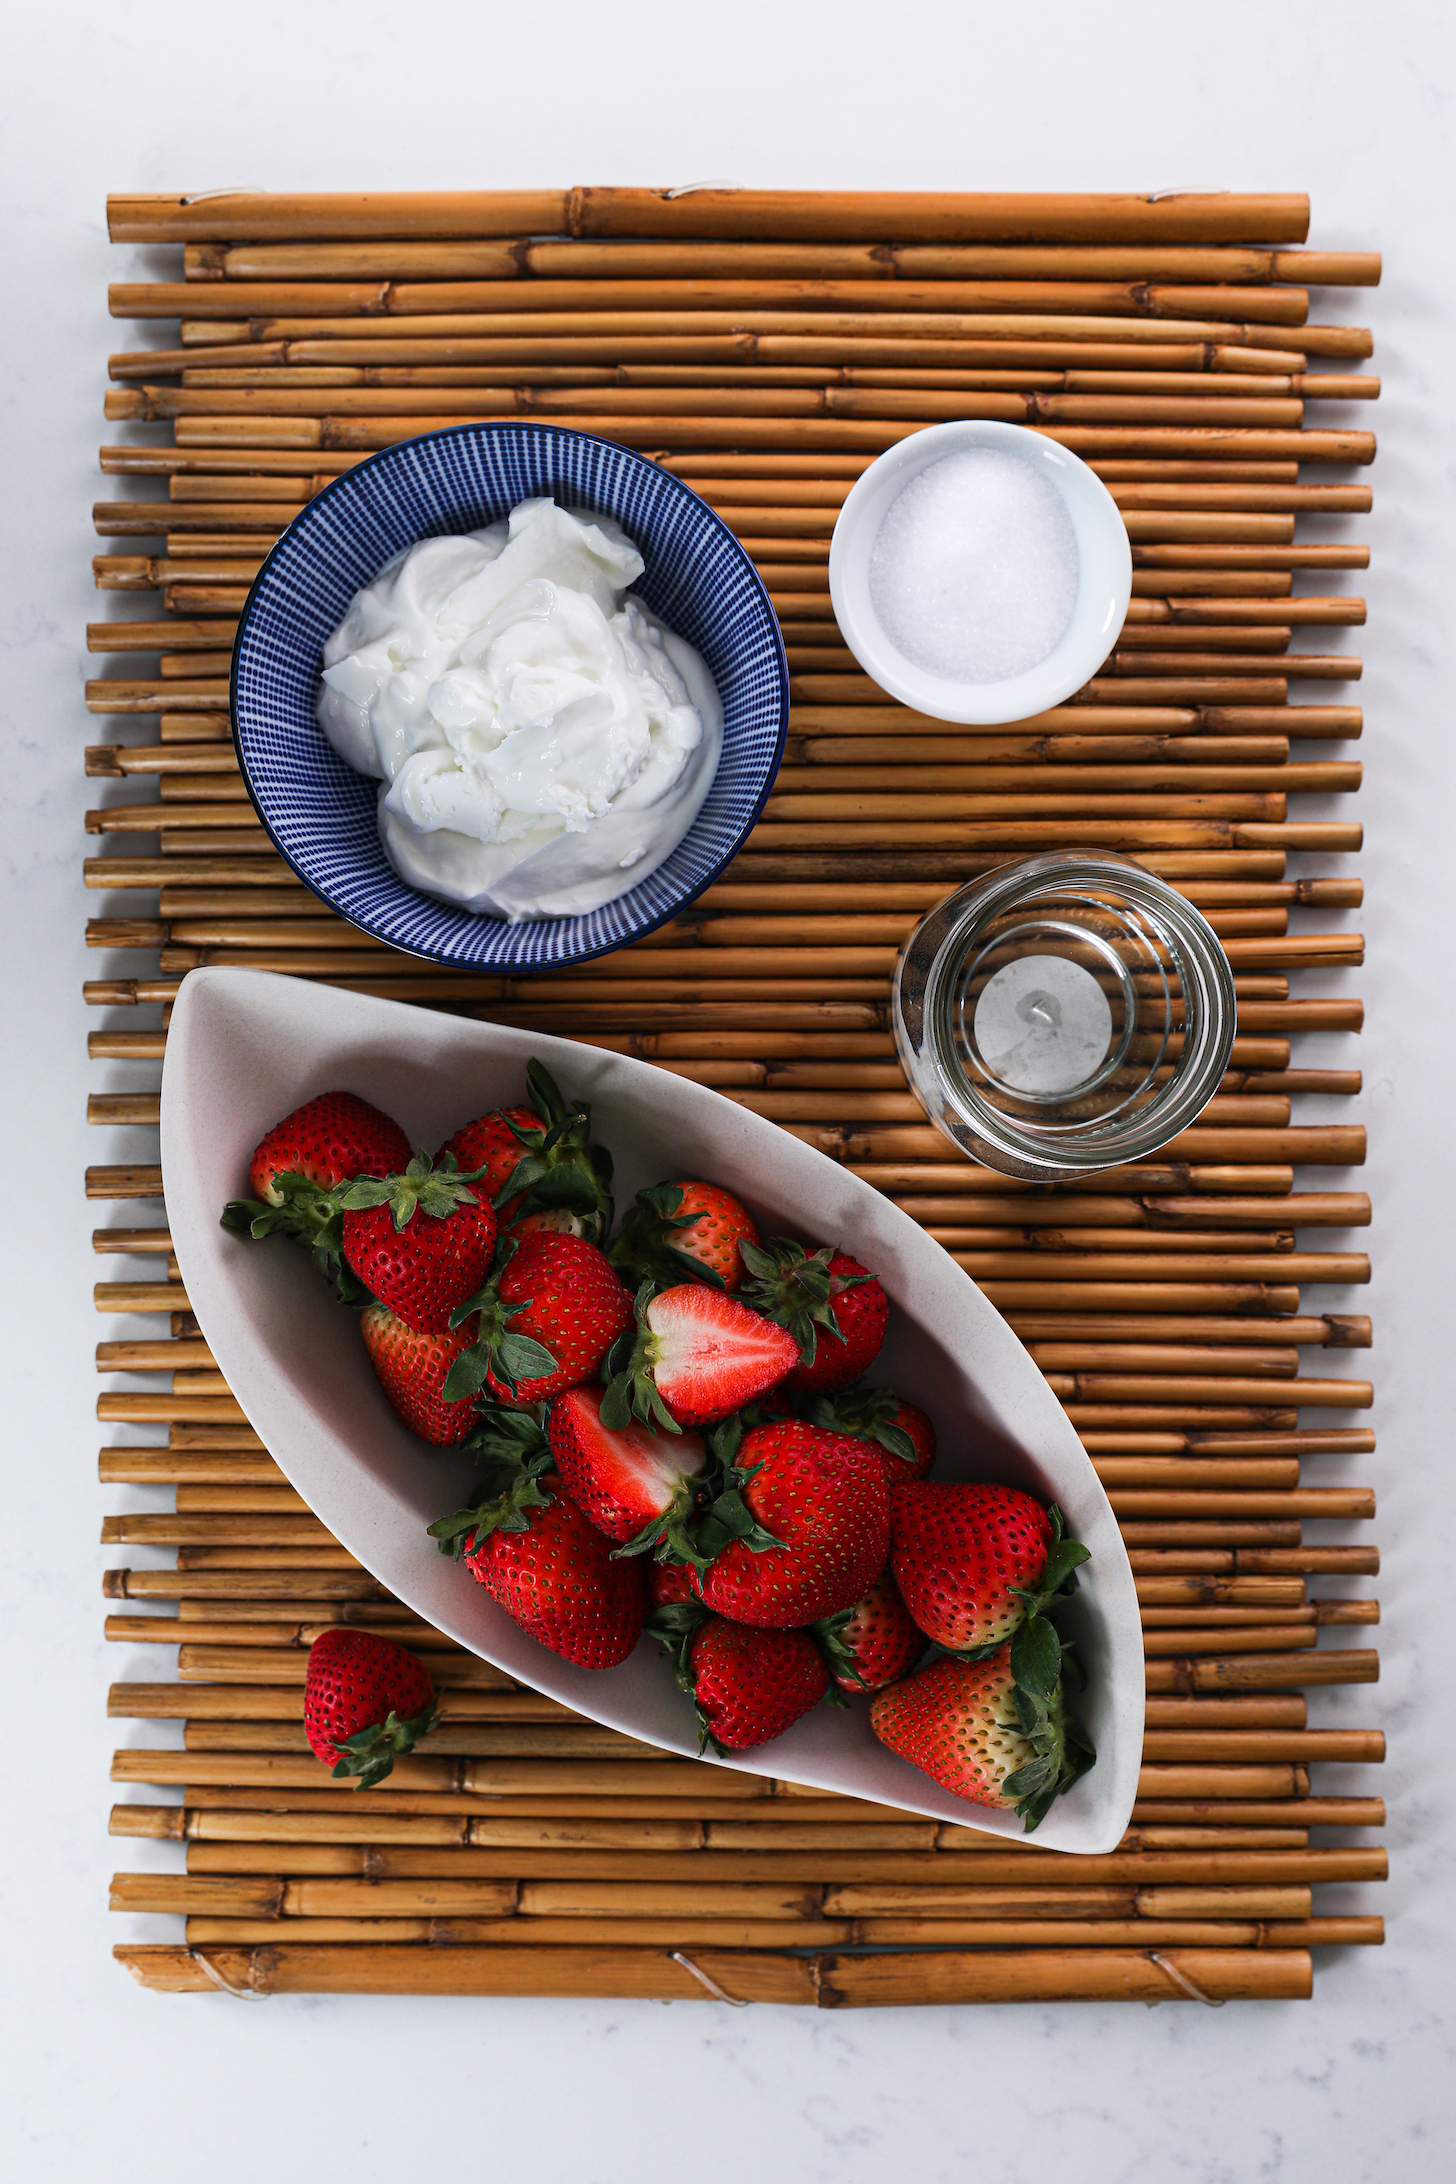 A collection of food ingredients like fresh strawberries, yogurt and water on a bamboo place mat.